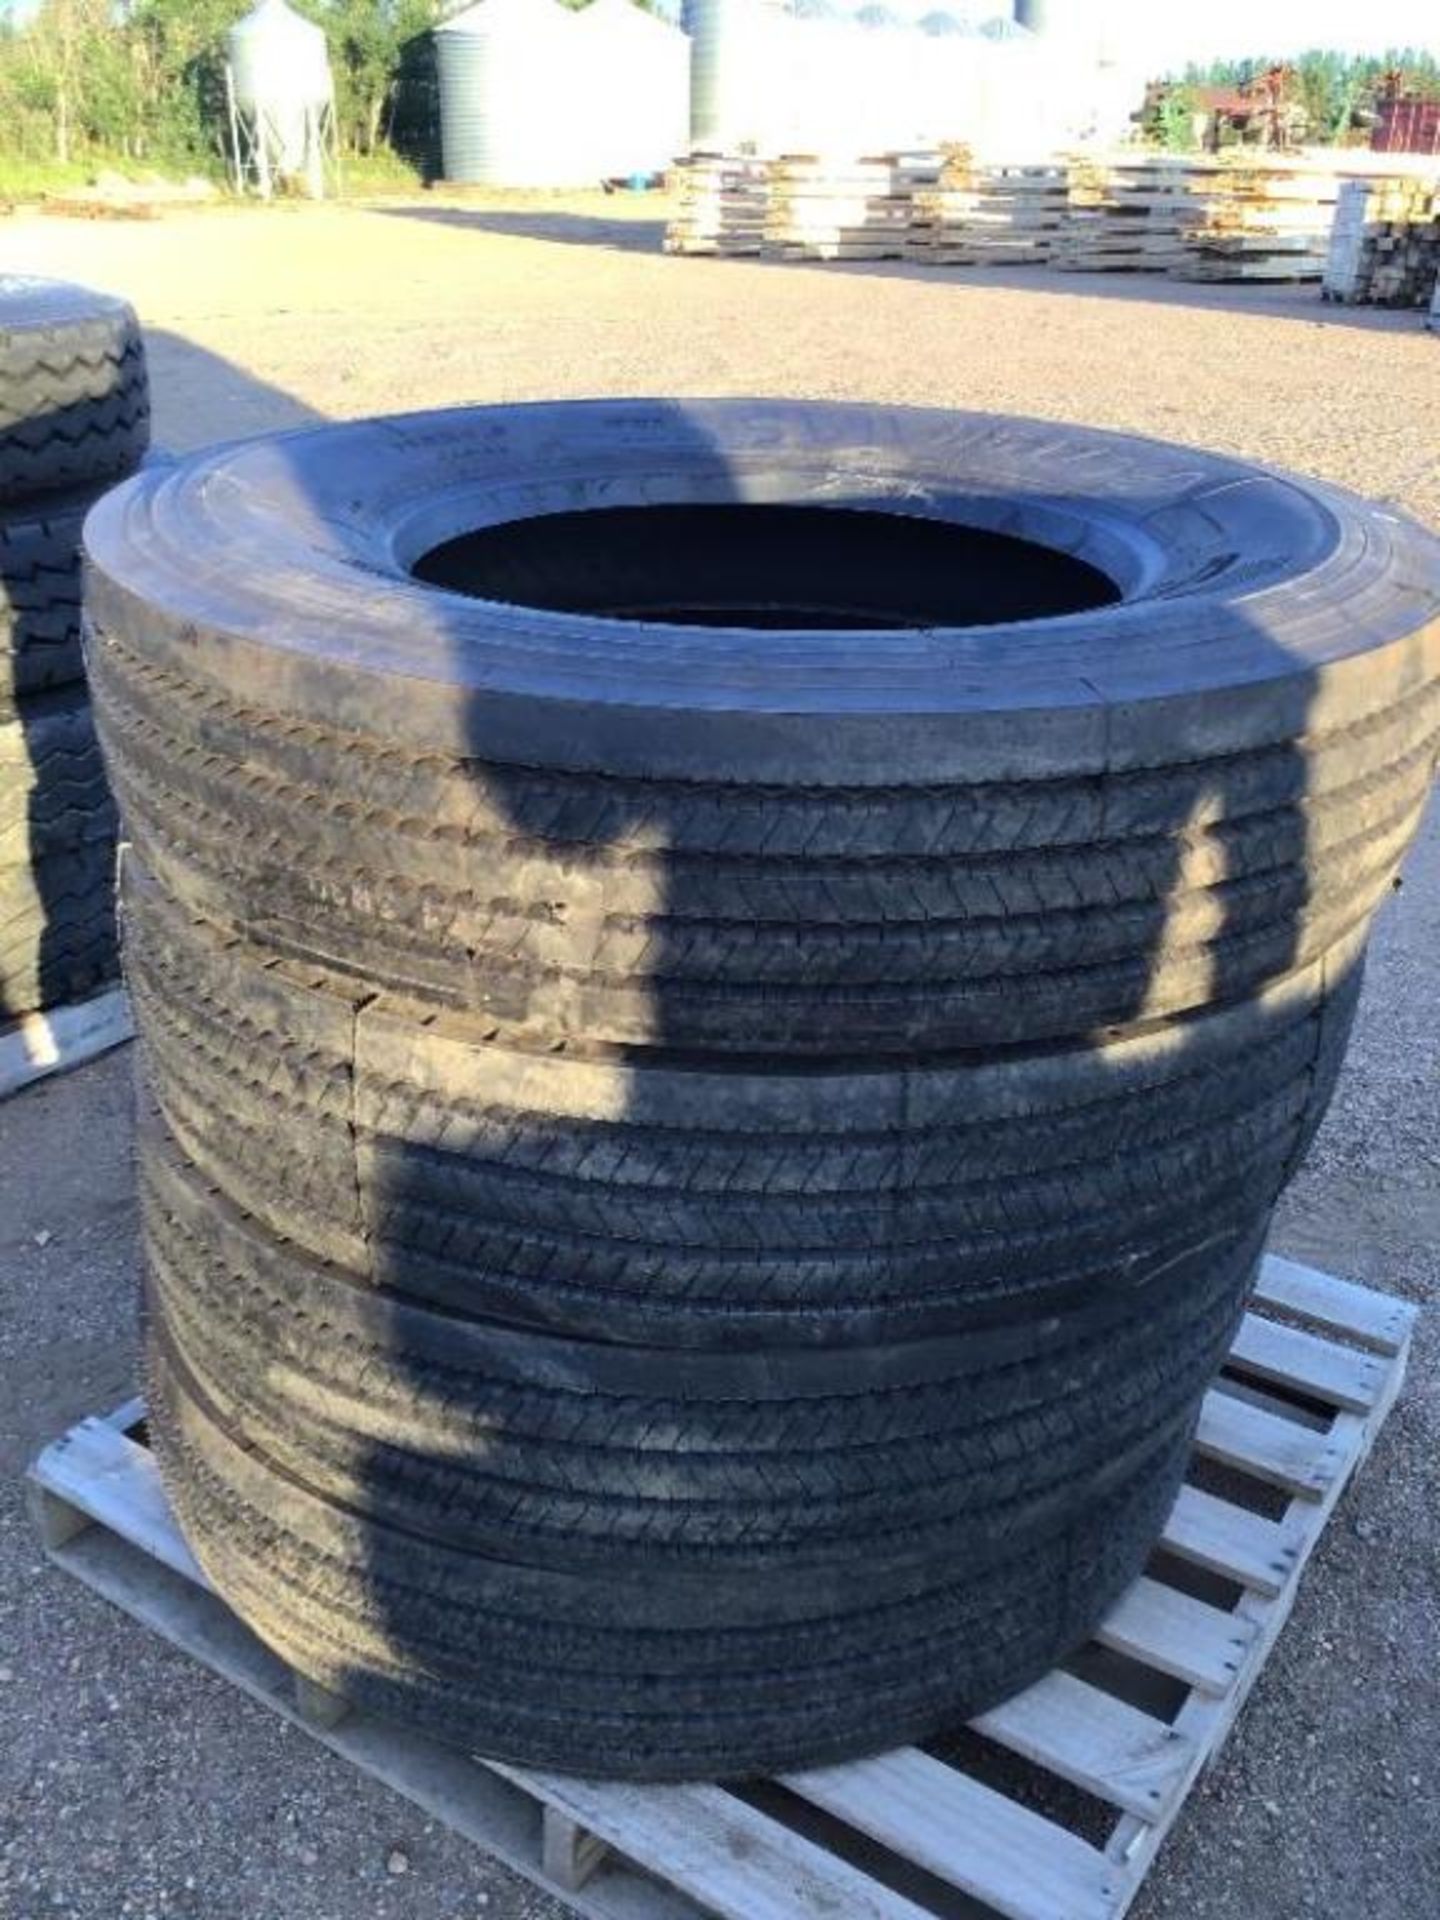 Set of (4) New 11R24.5 Tires